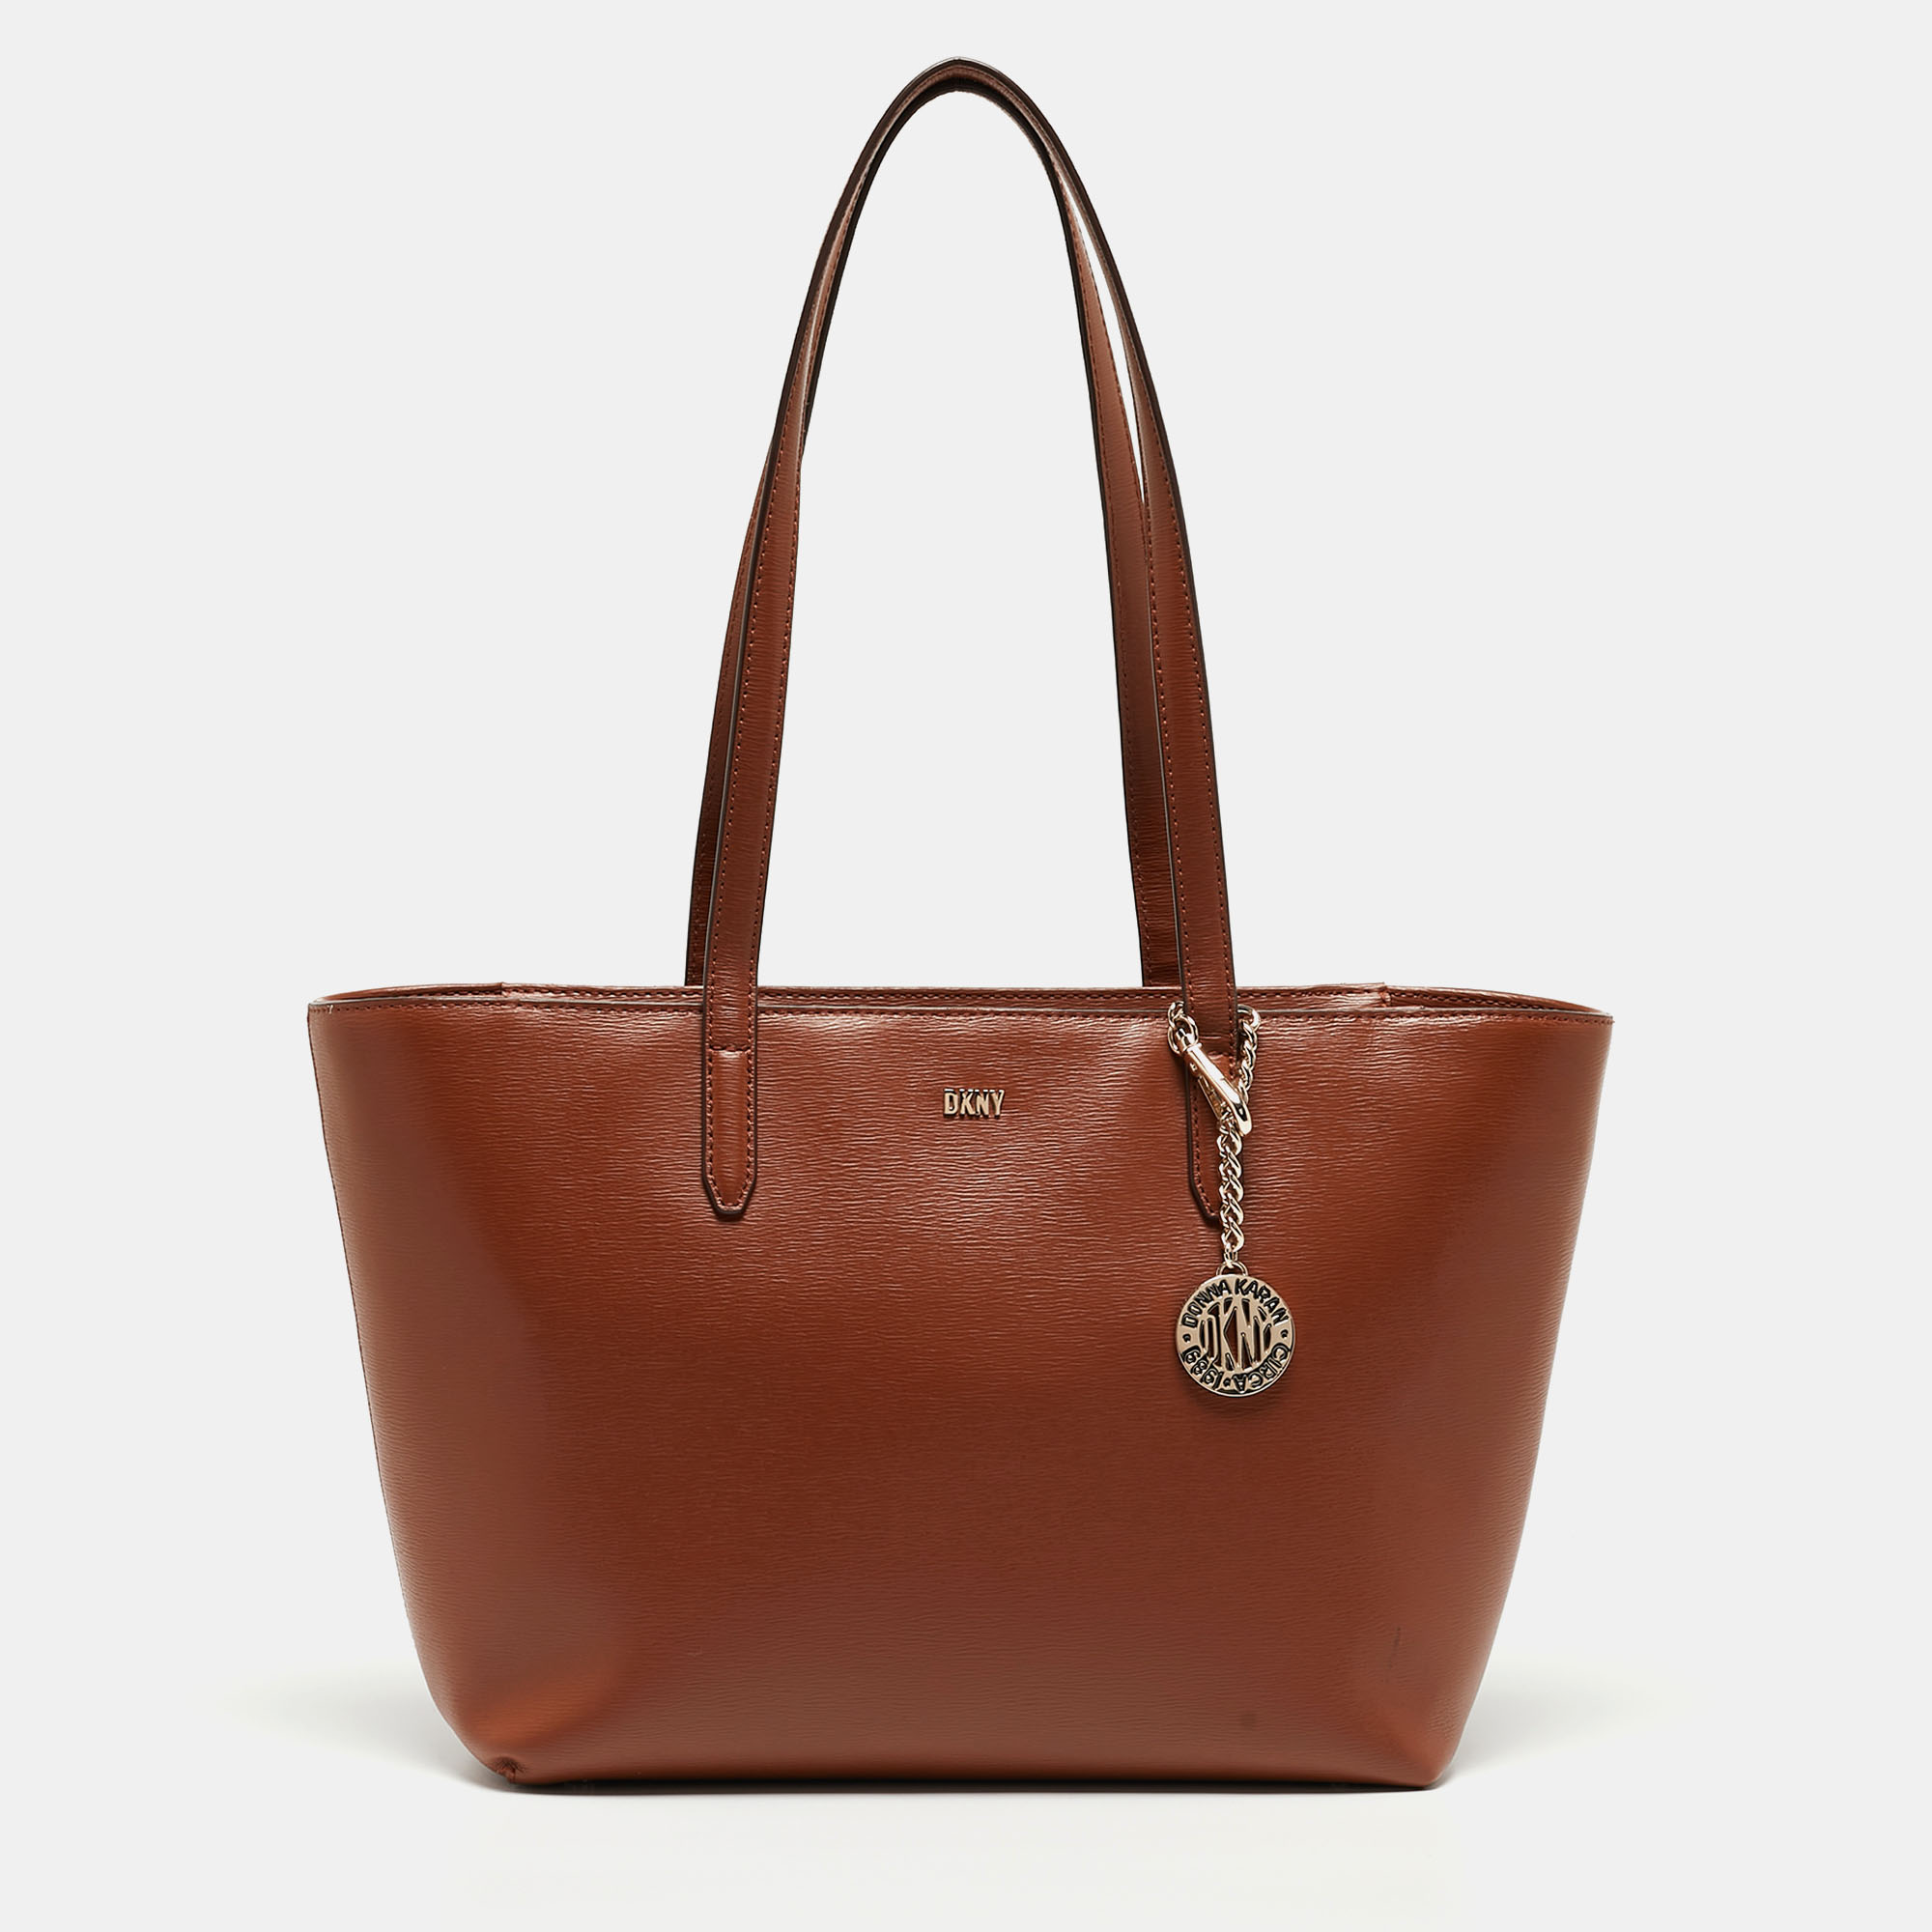 Bringing a mix of timeless fashion and fine craftsmanship is this tote. The bag comes with a durable exterior comfortable handles shiny hardware and a capacious interior. Fine elements complete the tote in a luxe way.